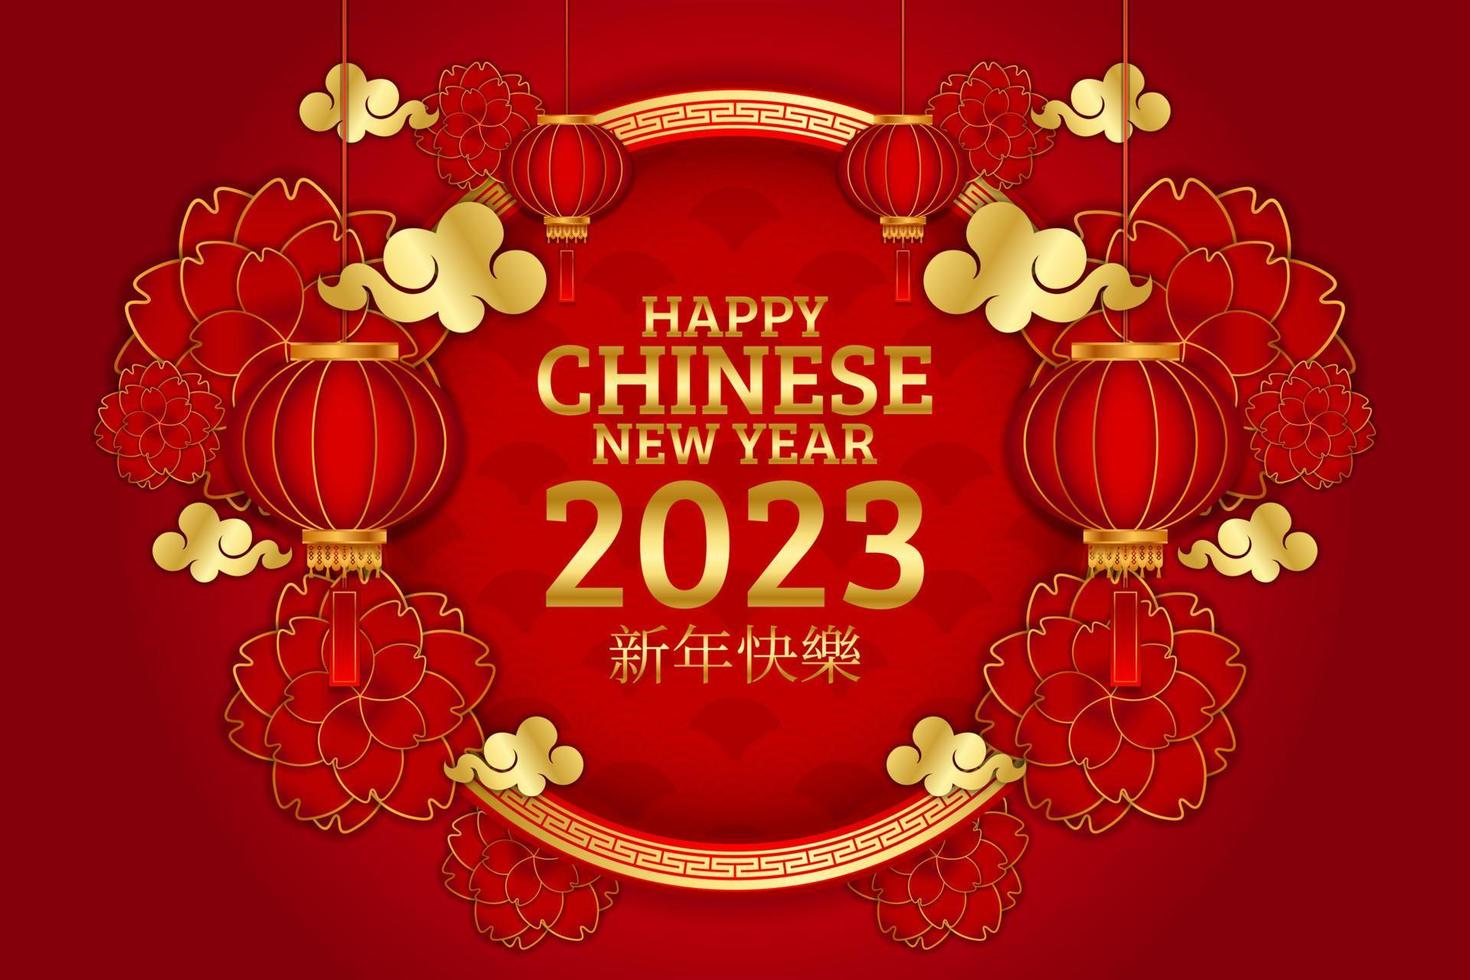 Chinese background 2023 template, Lunar new year concept with lantern or lamp, ornament, and red gold for sale, banner, posters, cover design templates, social media wallpaper, gong xi fa cai vector